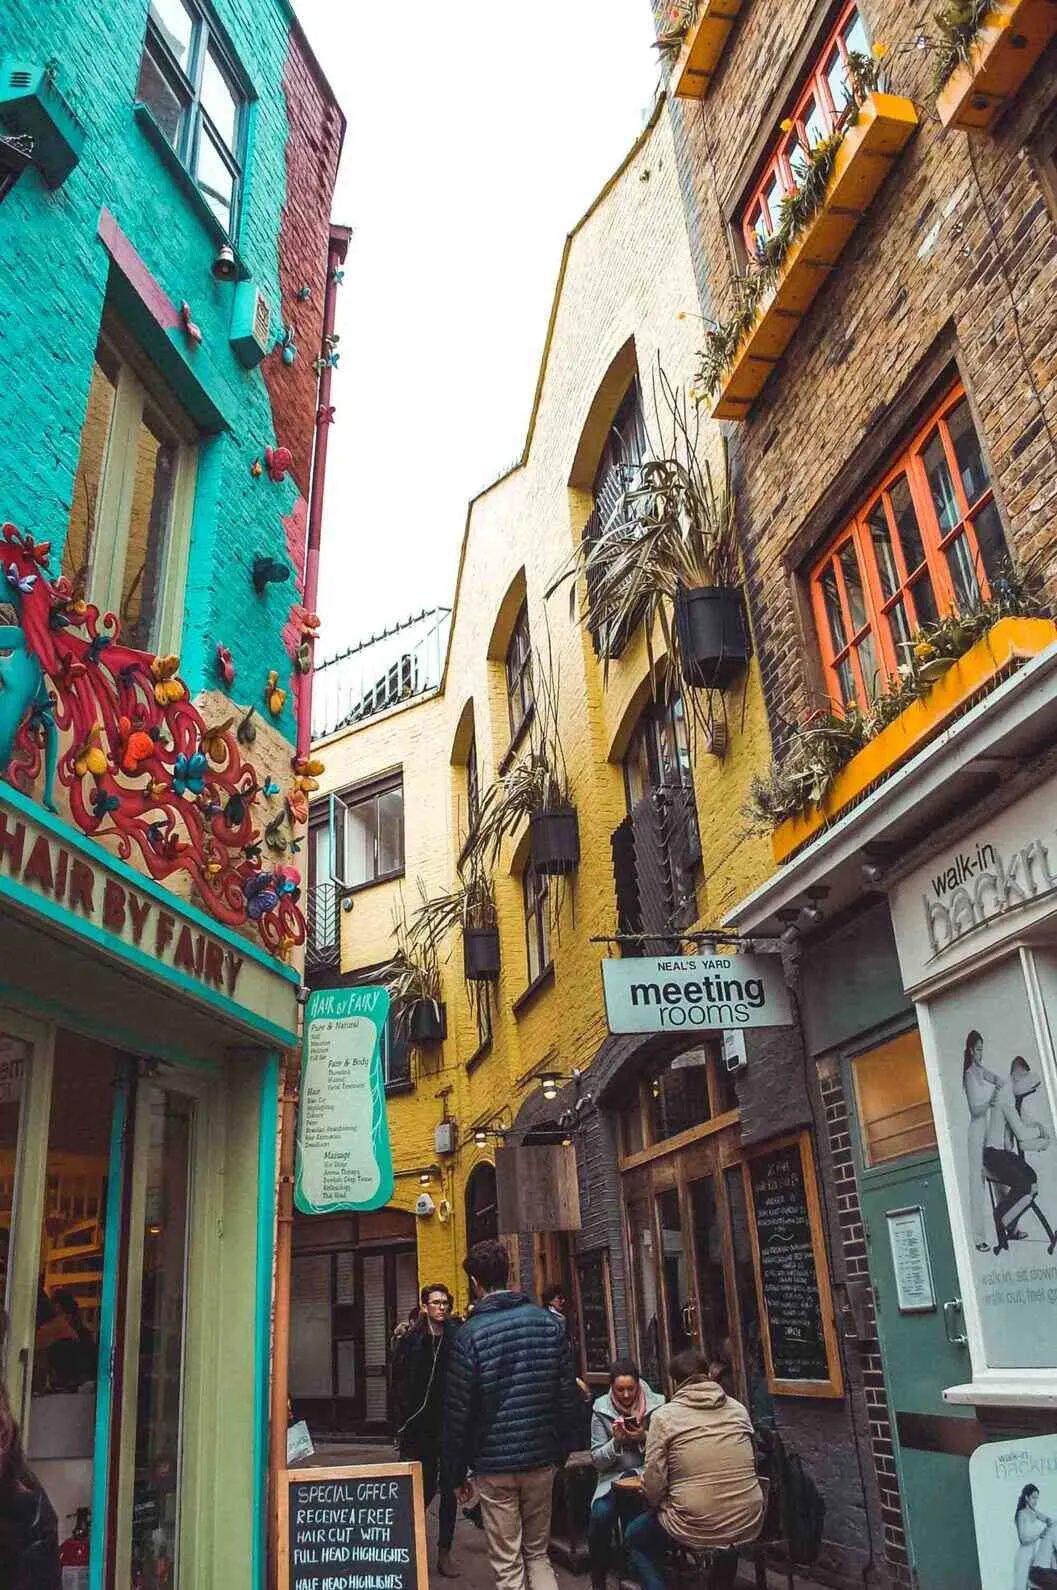 Neal's Yard is a short walk from Covent Garden lined with cute cafes and restaurants. Plus the colourful buildings make for a good photo op. 